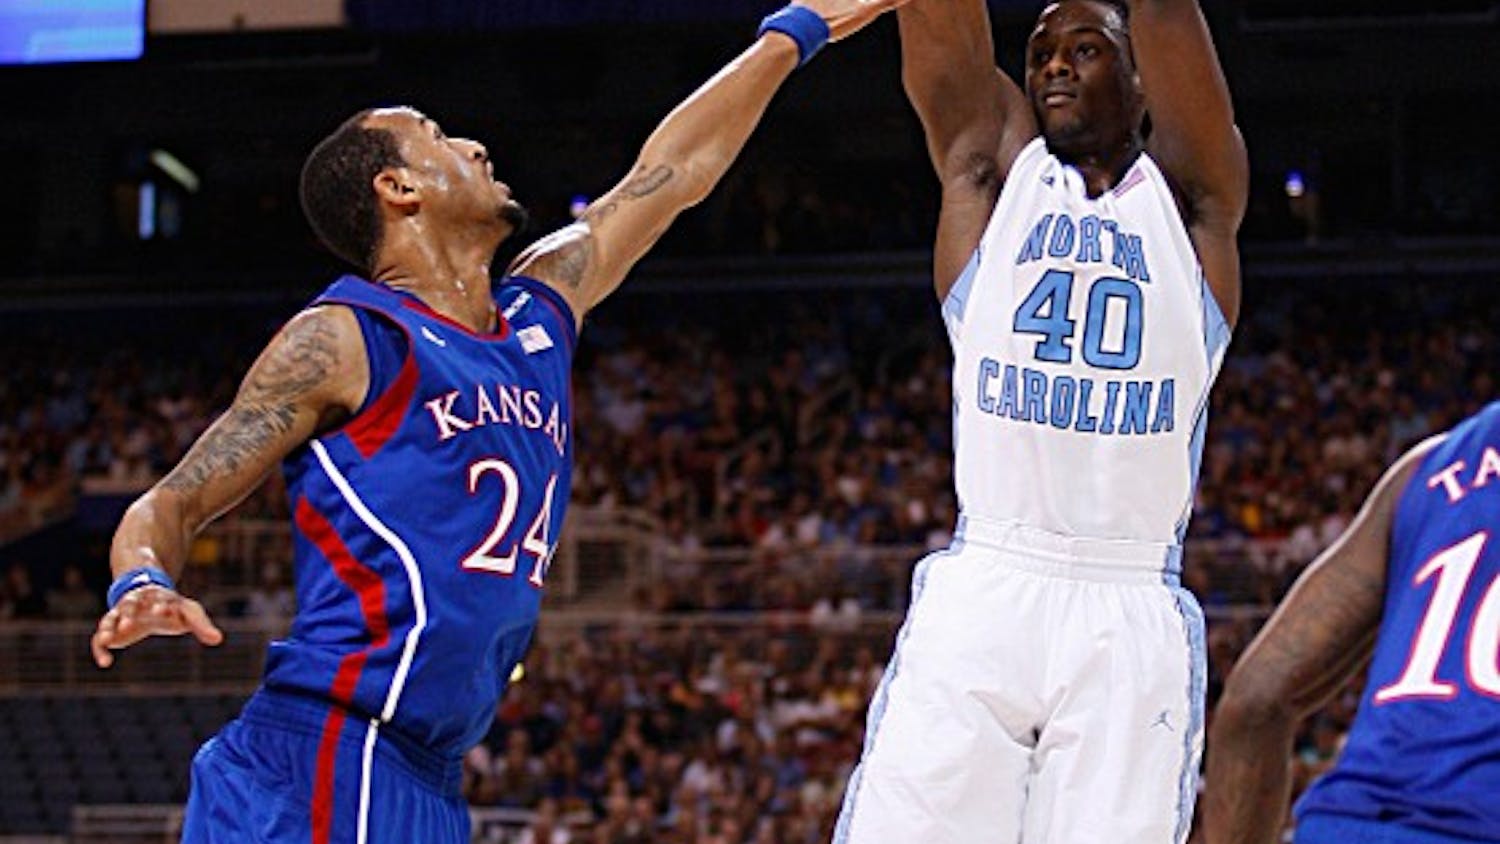 UNC forward Harrison Barnes shoots a jump shot as he is defended by Kansas guard Travis Releford. 